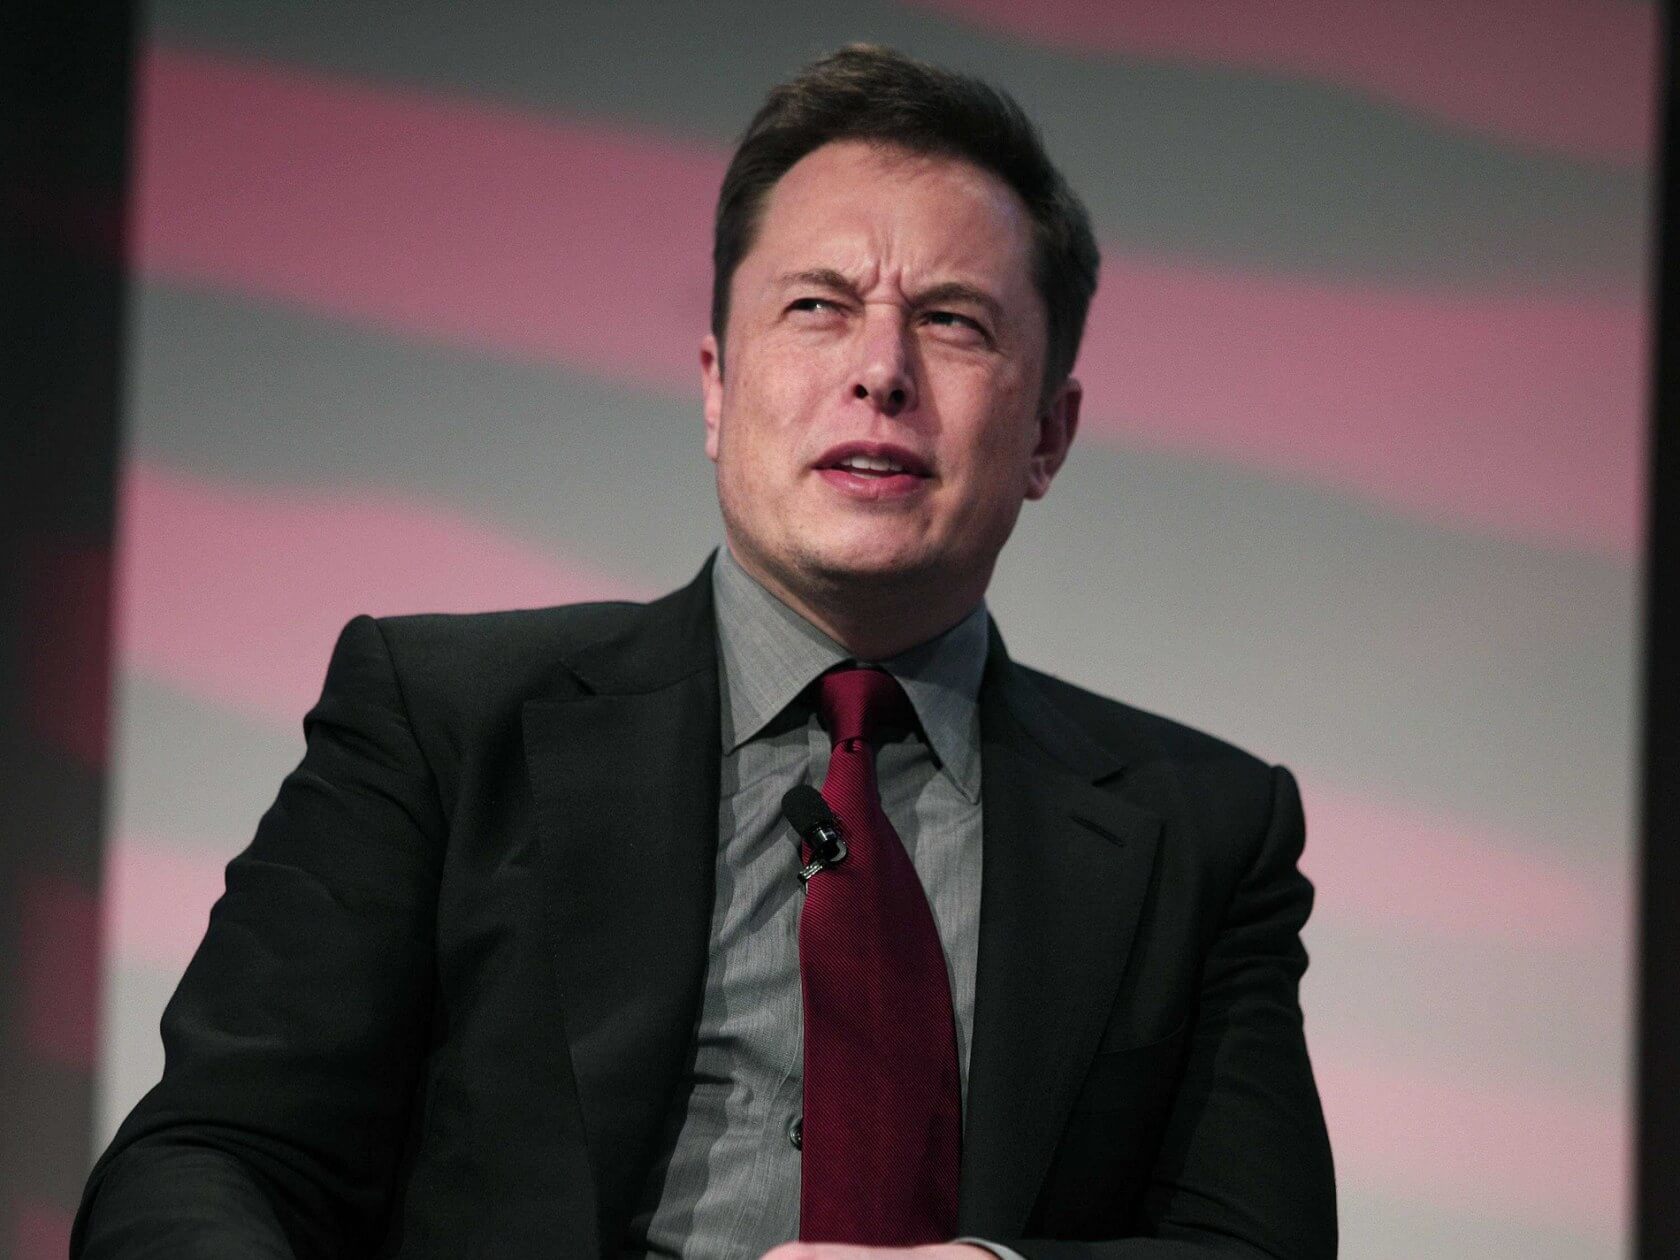 Elon Musk is no longer the world's wealthiest person